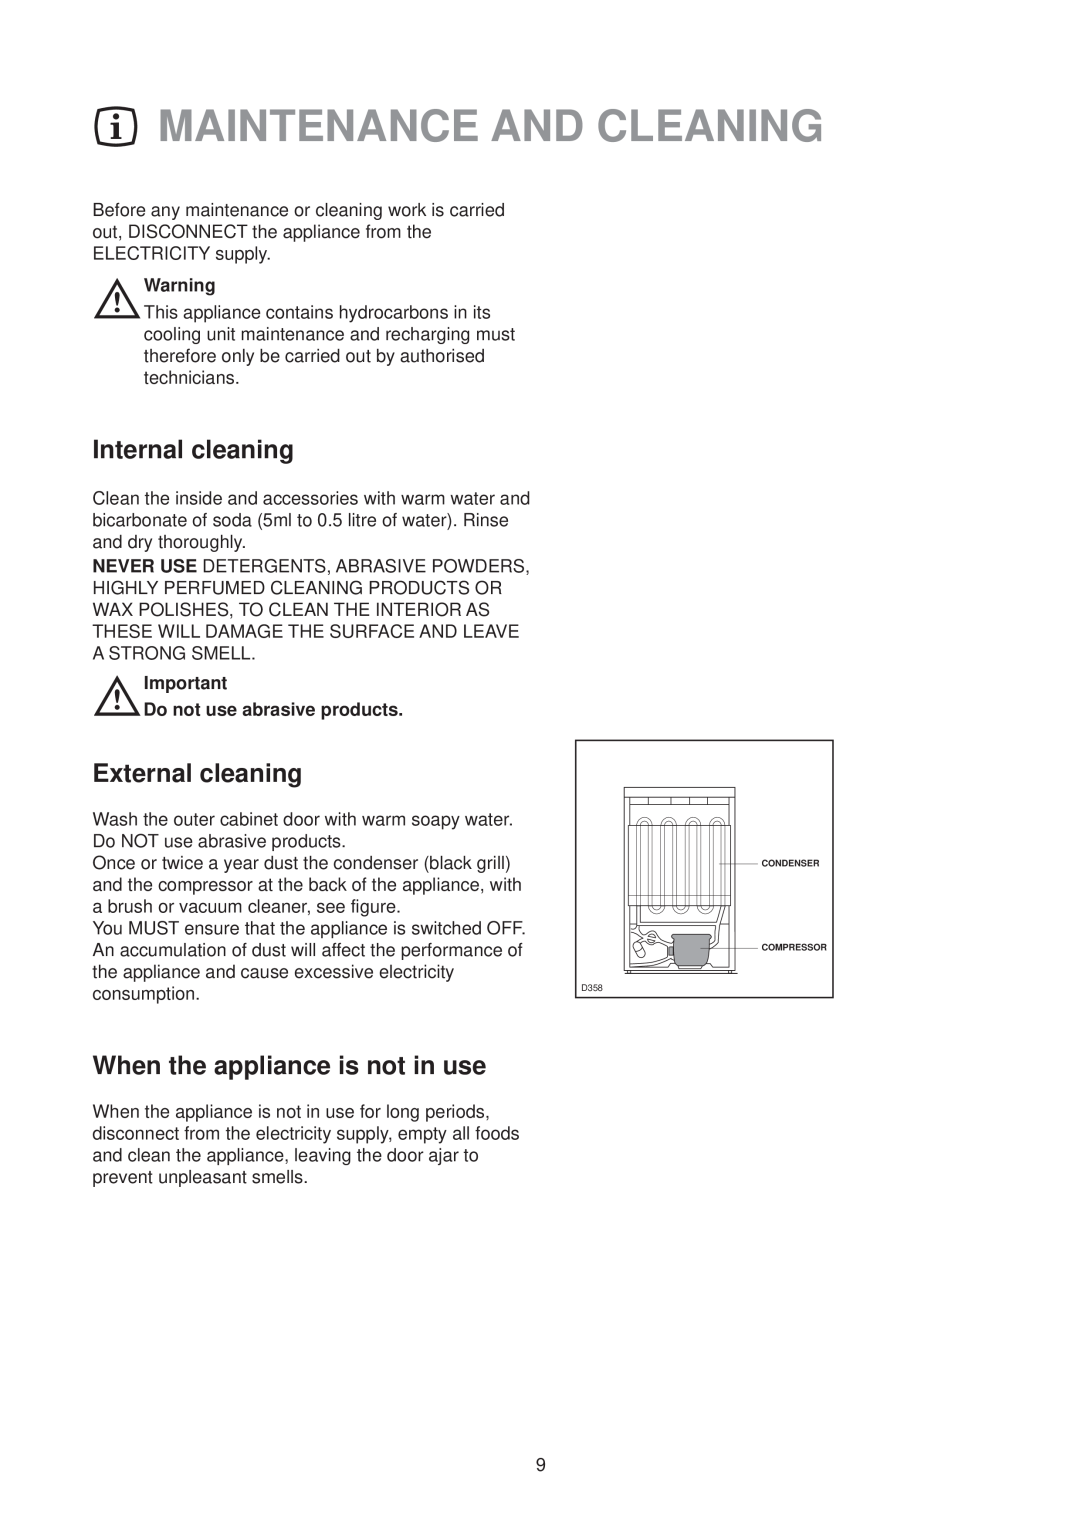 Electrolux EU 1327T manual Maintenance And Cleaning, Internal cleaning, External cleaning, When the appliance is not in use 